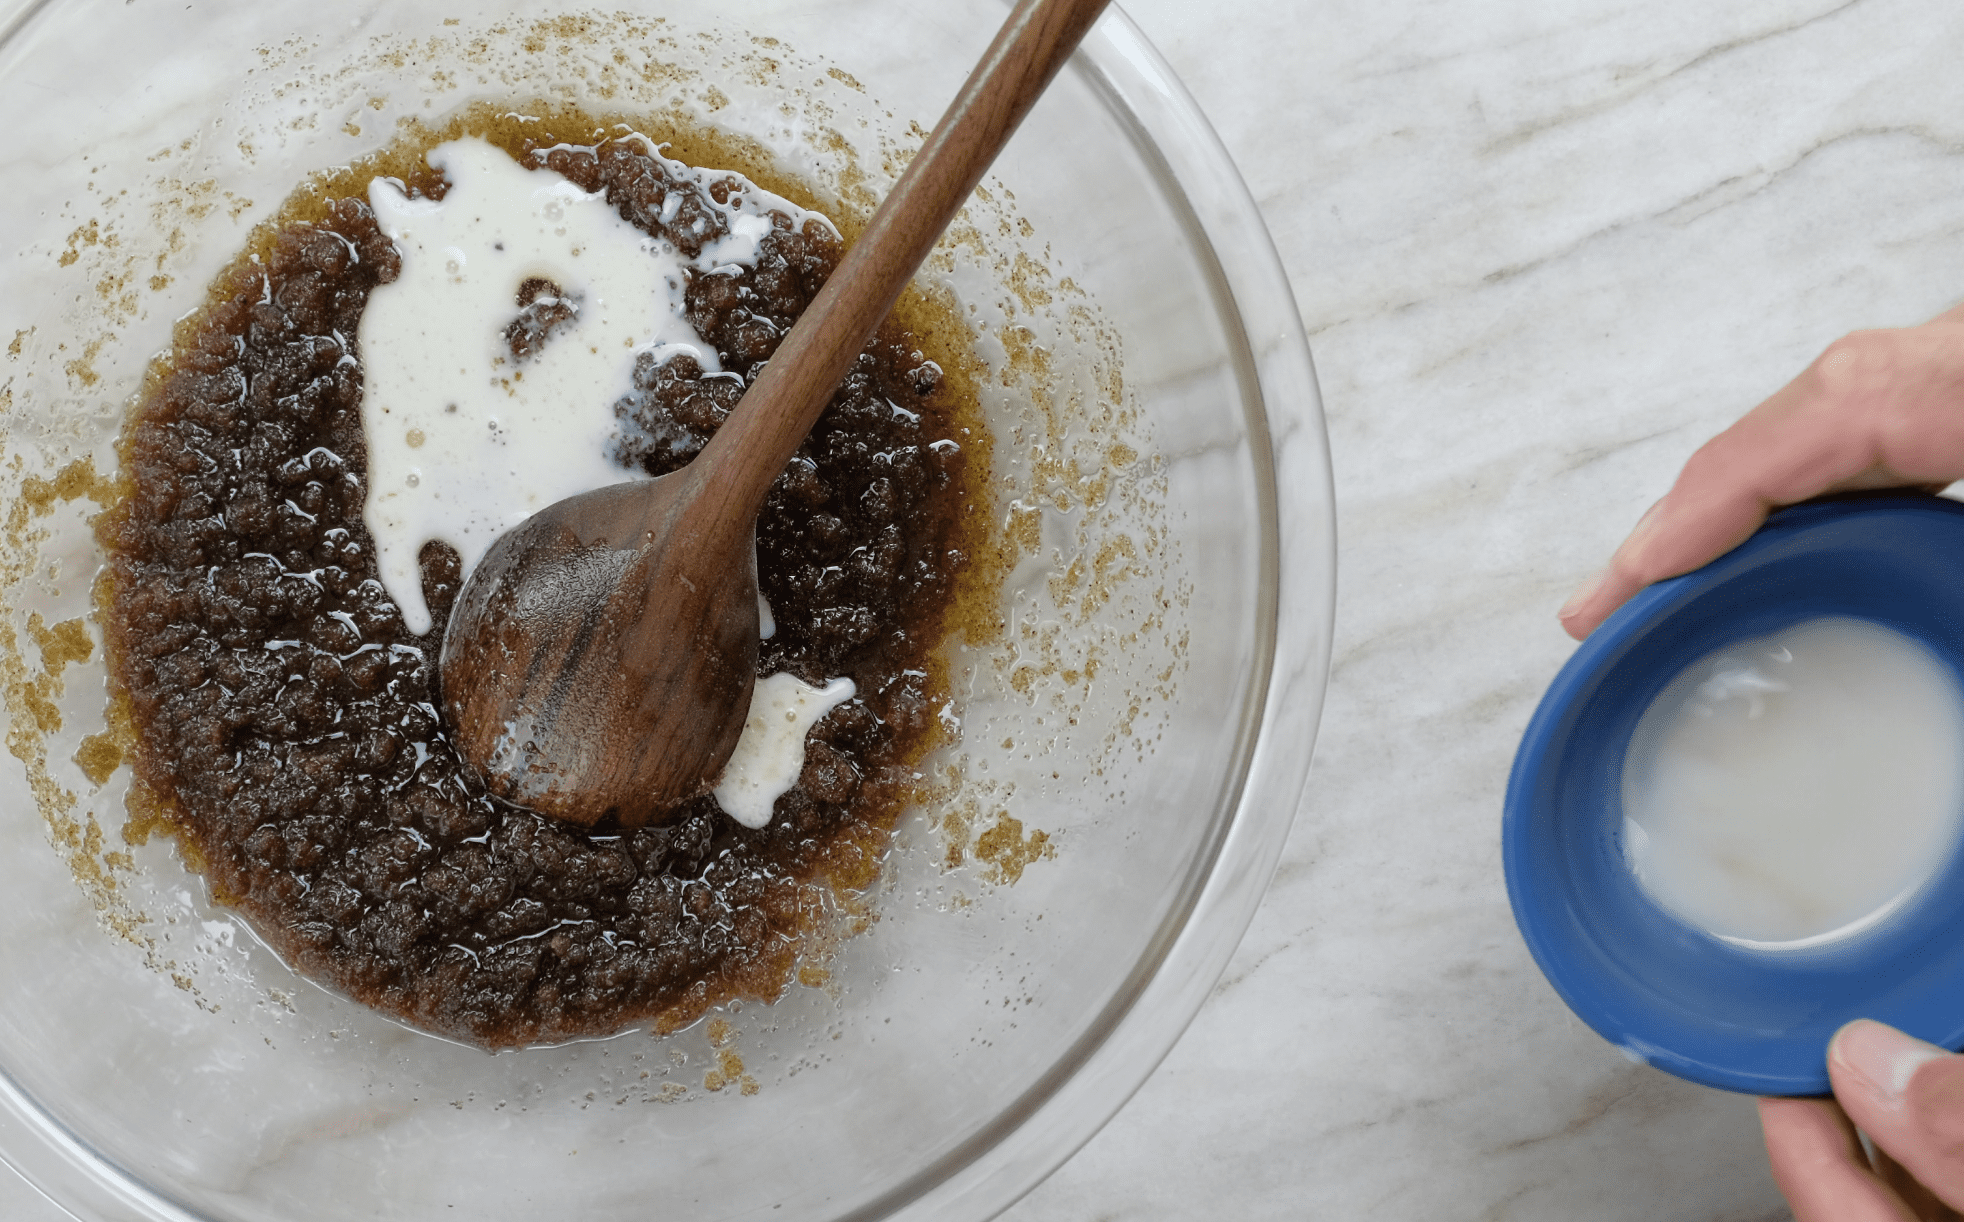 ADDING PLANT MIK TO SUGAR AND MELTED BUTTER